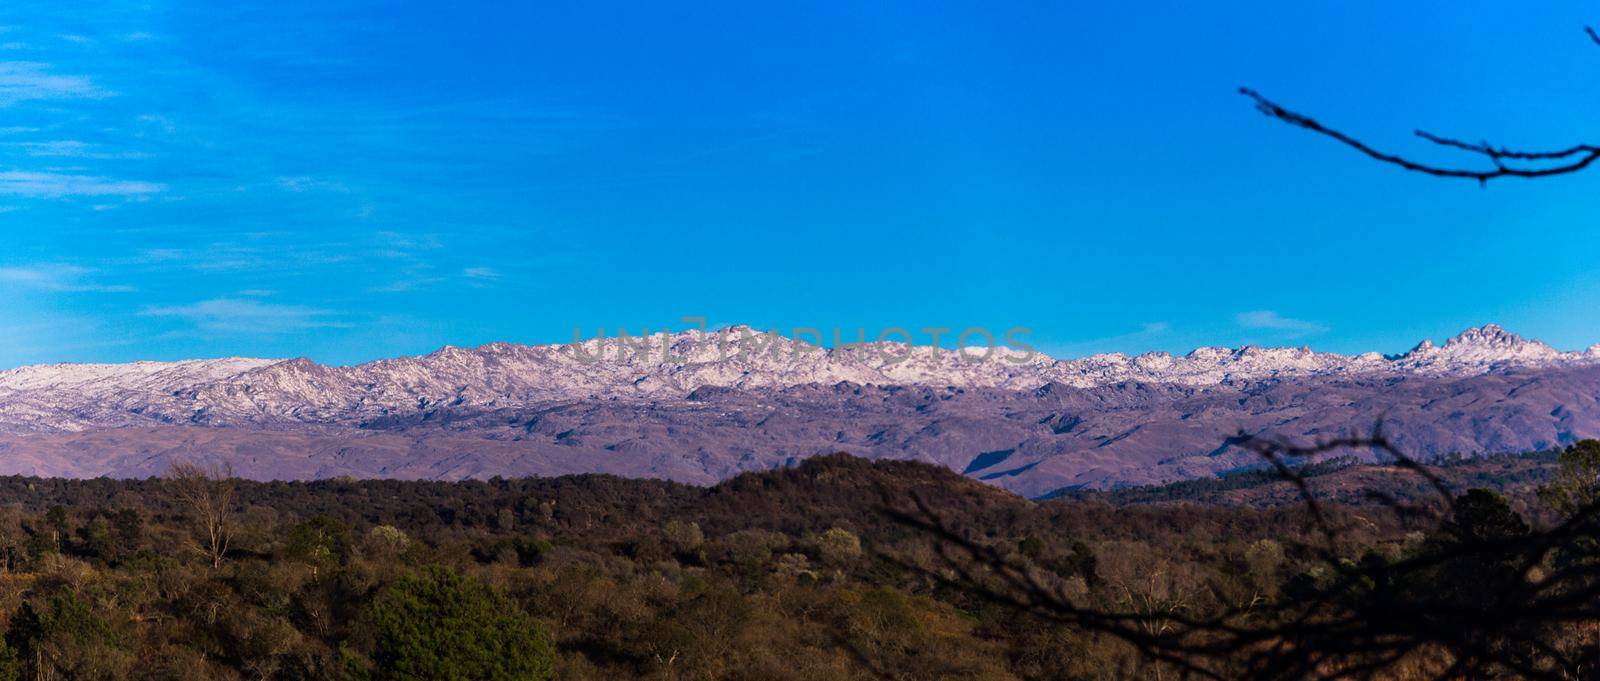 landscape of the snowy mountain ranges from the Calamuchita Valley, Cordoba, Argentina